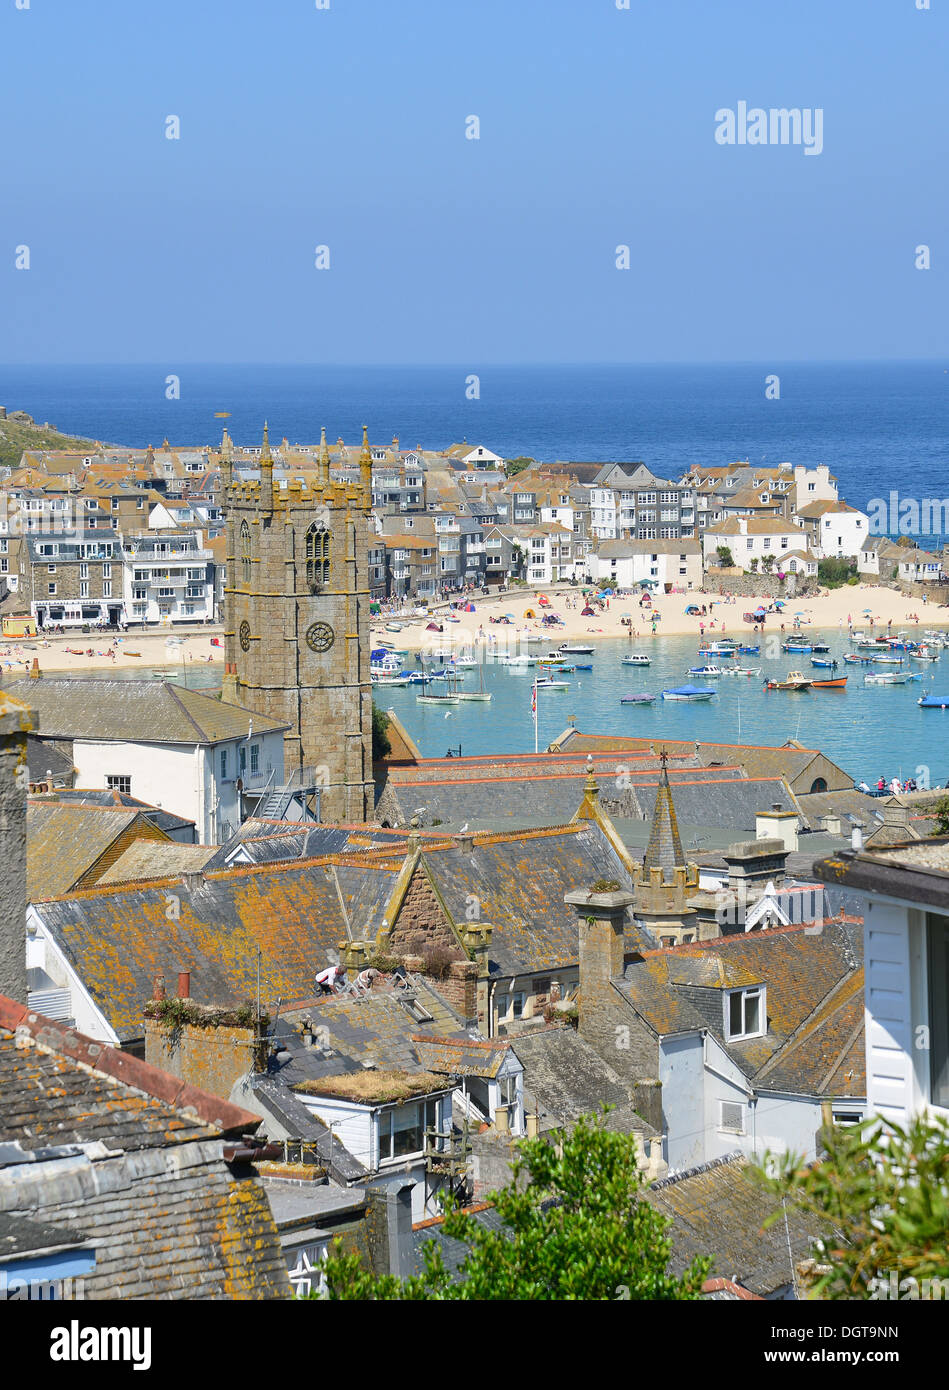 St Ives Harbour, St Ives, Cornwall, England, United Kingdom Stock Photo